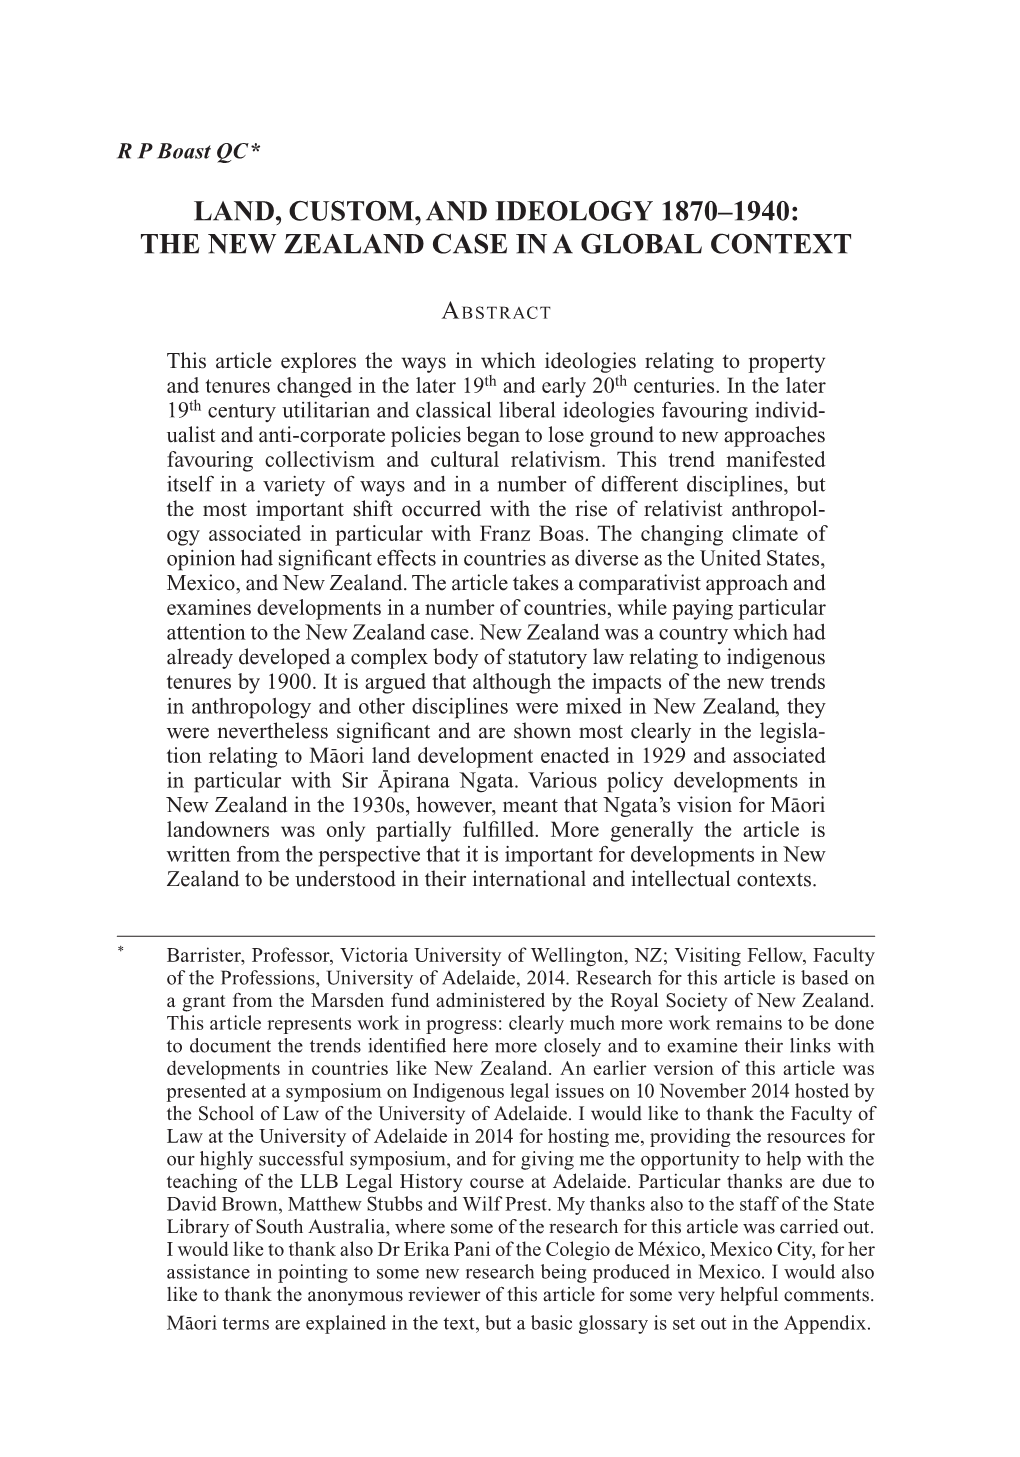 The New Zealand Case in a Global Context